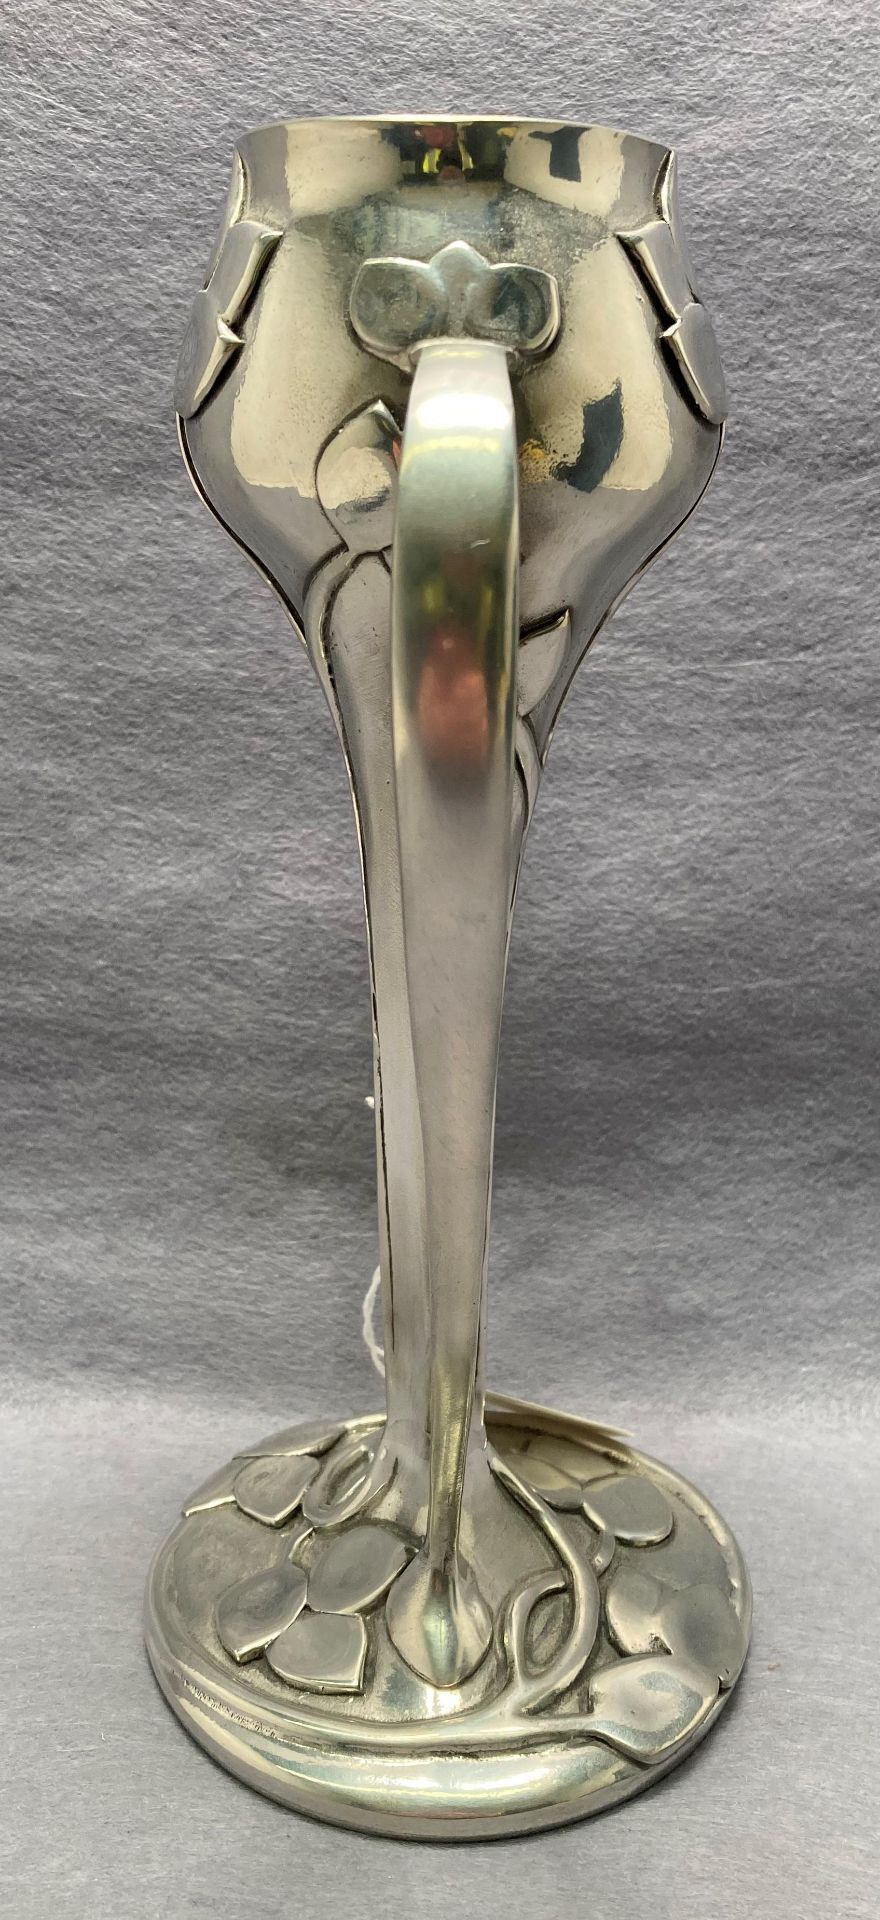 An Art Nouveau pewter tulip vase designed by ARCHIBALD KNOX, A E WILLIAMS - stamped to base, - Image 2 of 3